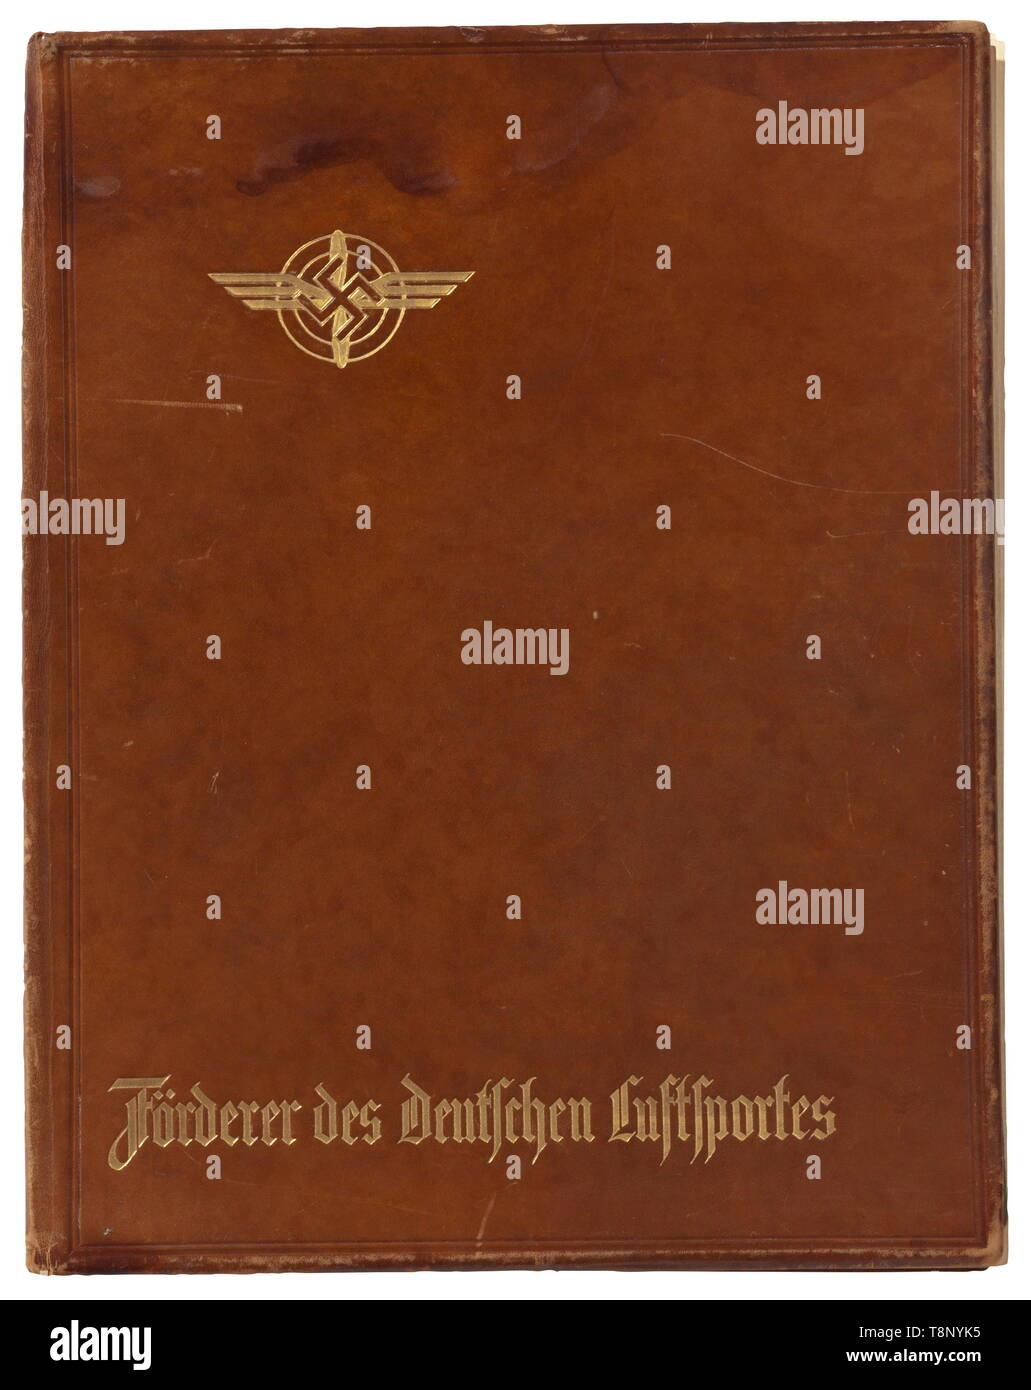 An honour book of the promoters of German aerial sports 1933 Large-sized, brown leather folder with gold-imprinted DLV emblem and inscription 'Förderer des deutschen Luftsportes'. On the flyleaf preamble for the foundation of the DLV by Bruno Loerzer. On the following pages signatures and dedications by - amongst others - Adolf Hitler, Rudolf Heß, Hermann Göring - 'Im Geiste der Richthofen und Boelcke vorwärts!' (tr. In the spirit of Richthofen and Boelcke - Go ahead!), Erhard Milch, Friedrich Christiansen, Ernst Udet, Josef Goebbels, Julius Stre, Additional-Rights-Clearance-Info-Not-Available Stock Photo